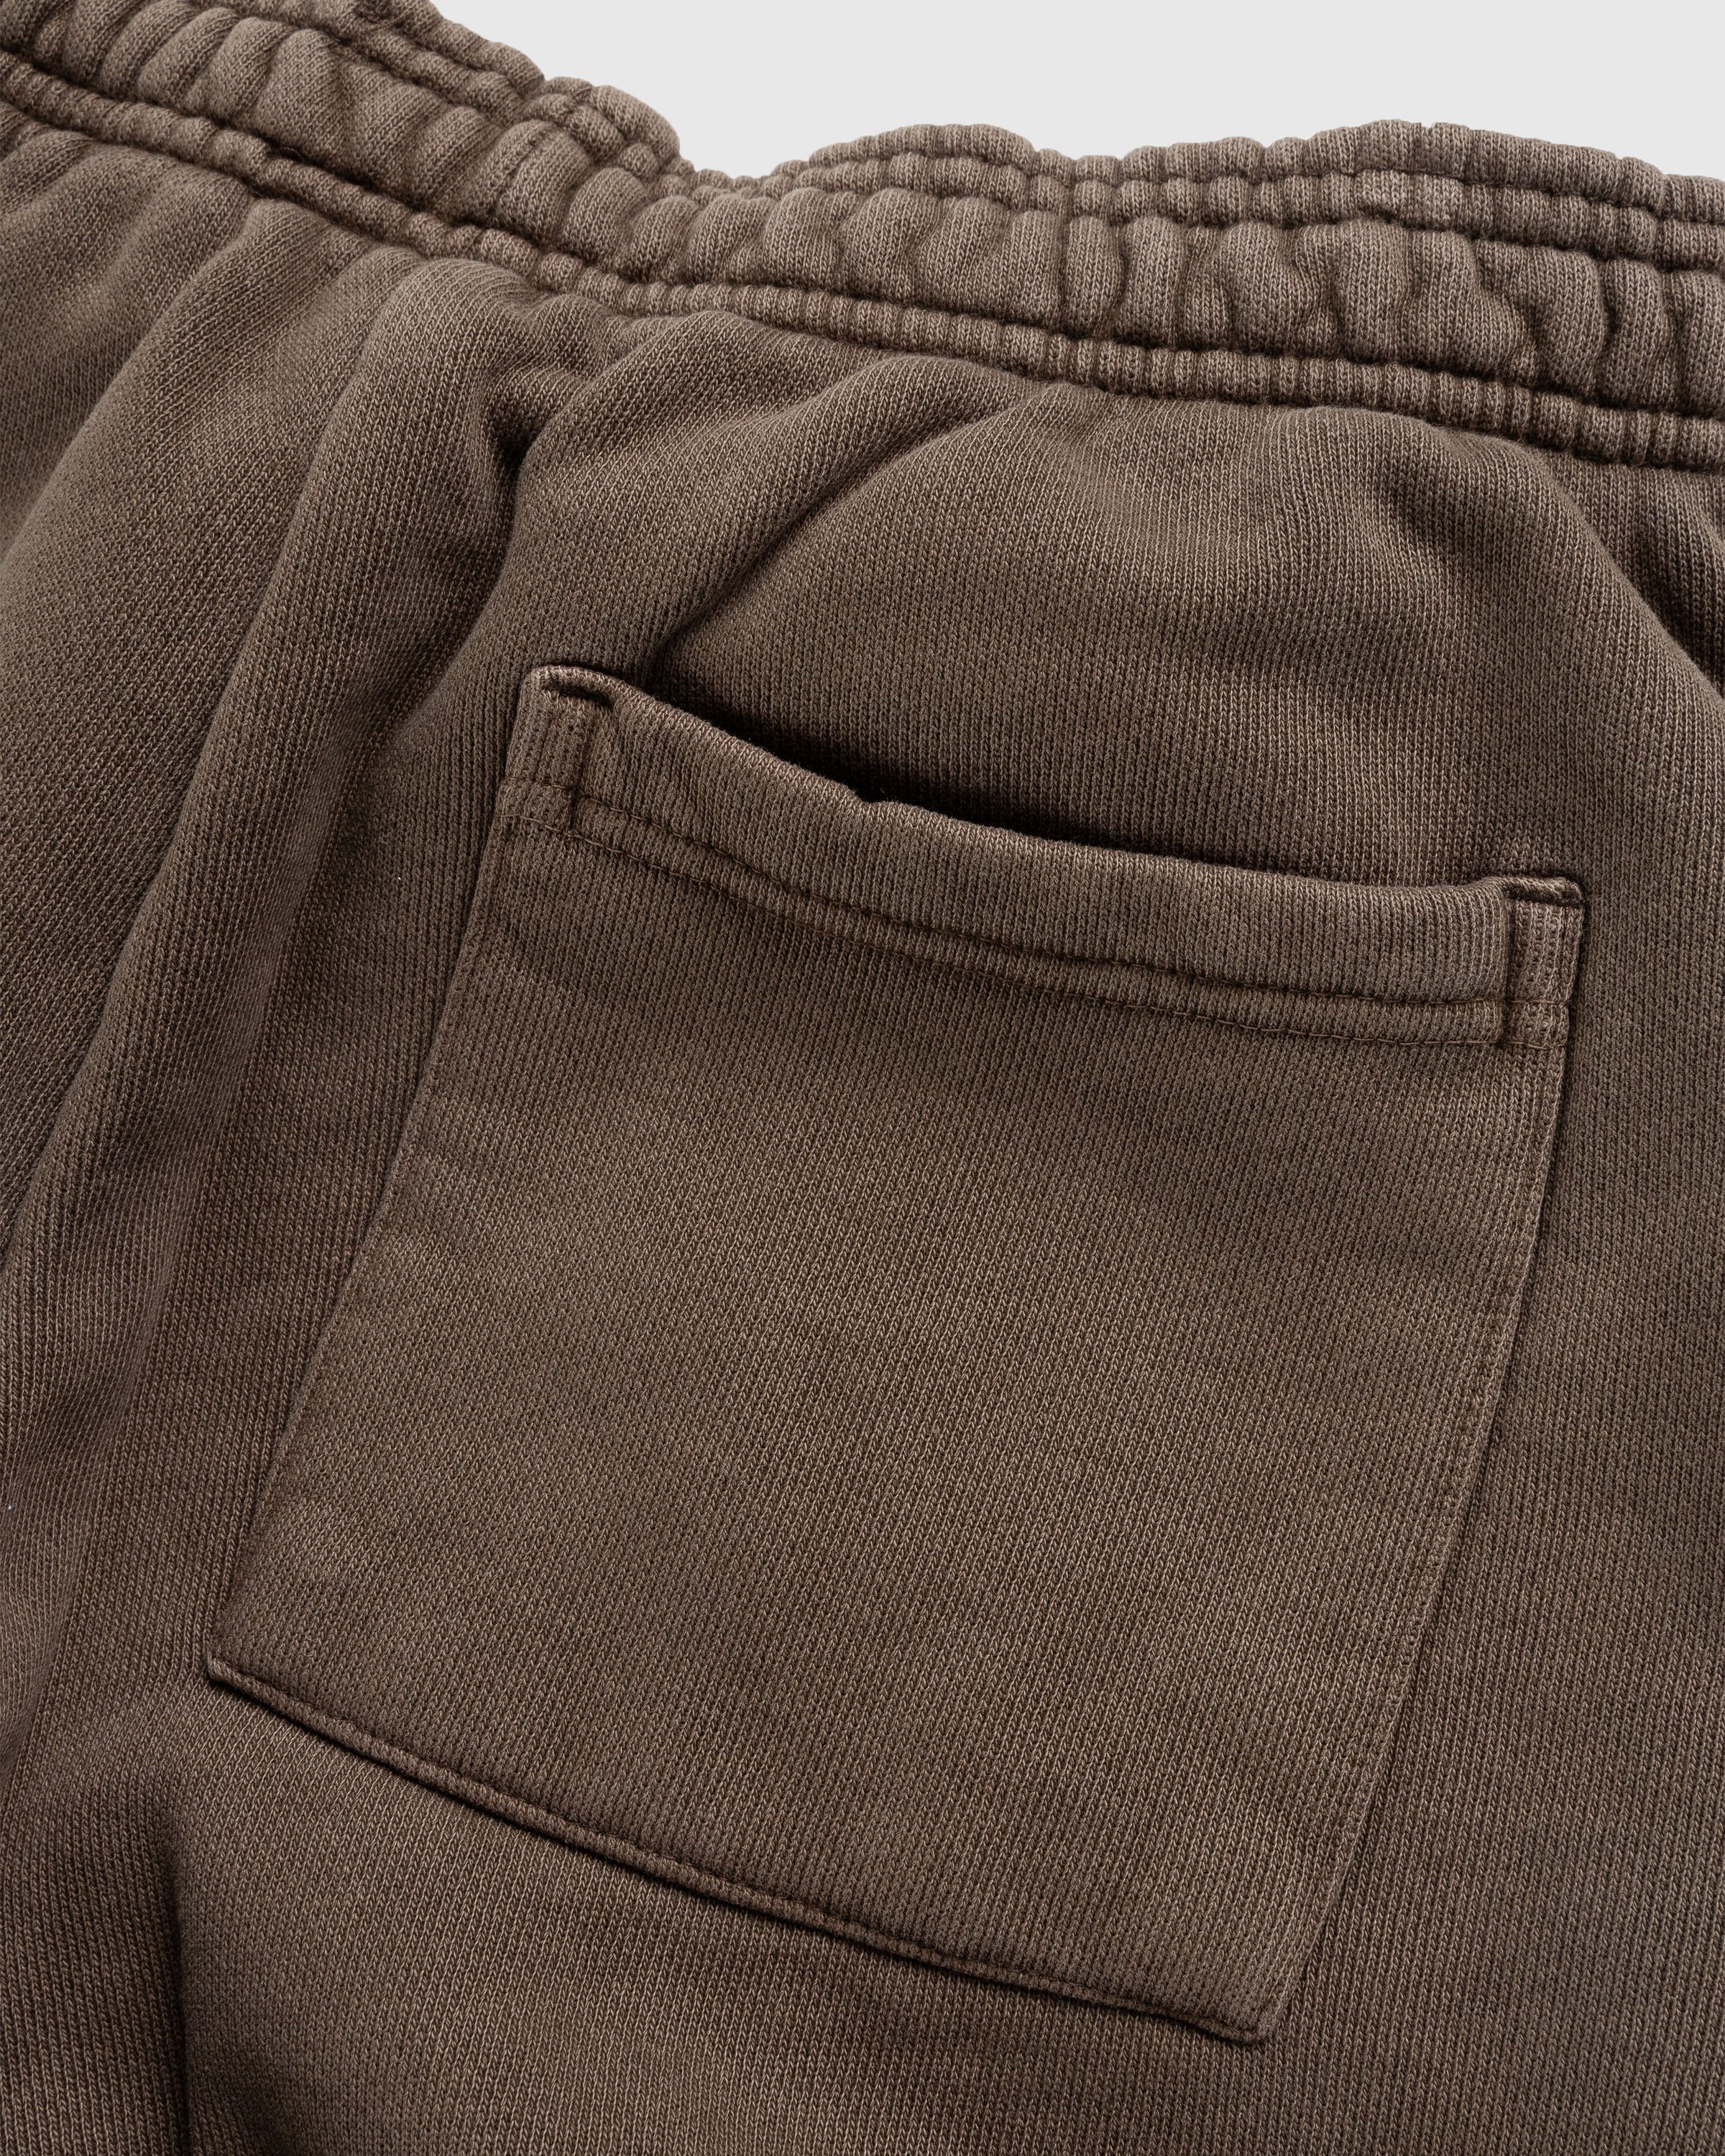 Entire Studios - Straight Leg Sweatpant Brown - Clothing - Brown - Image 5